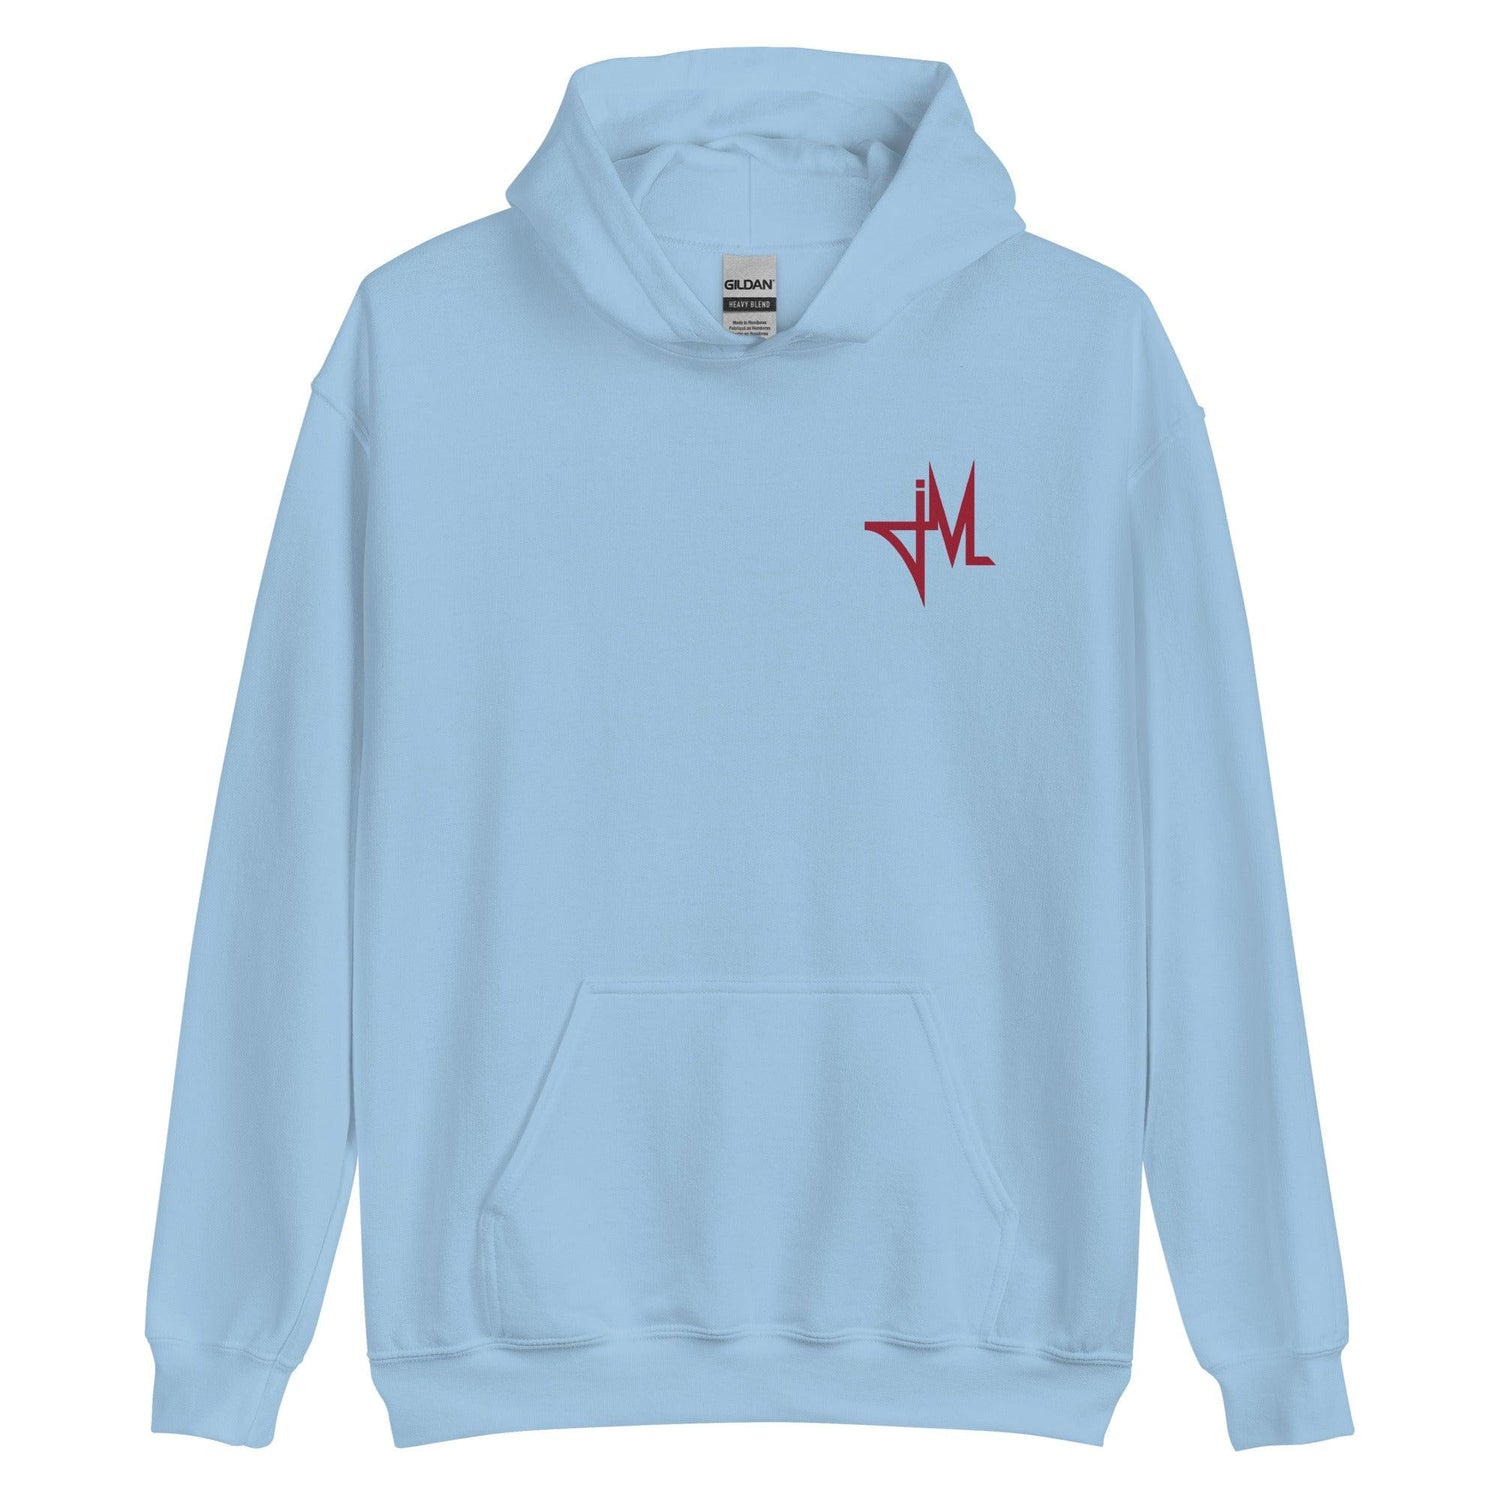 Jabe Mullins "Signature" Hoodie - Fan Arch